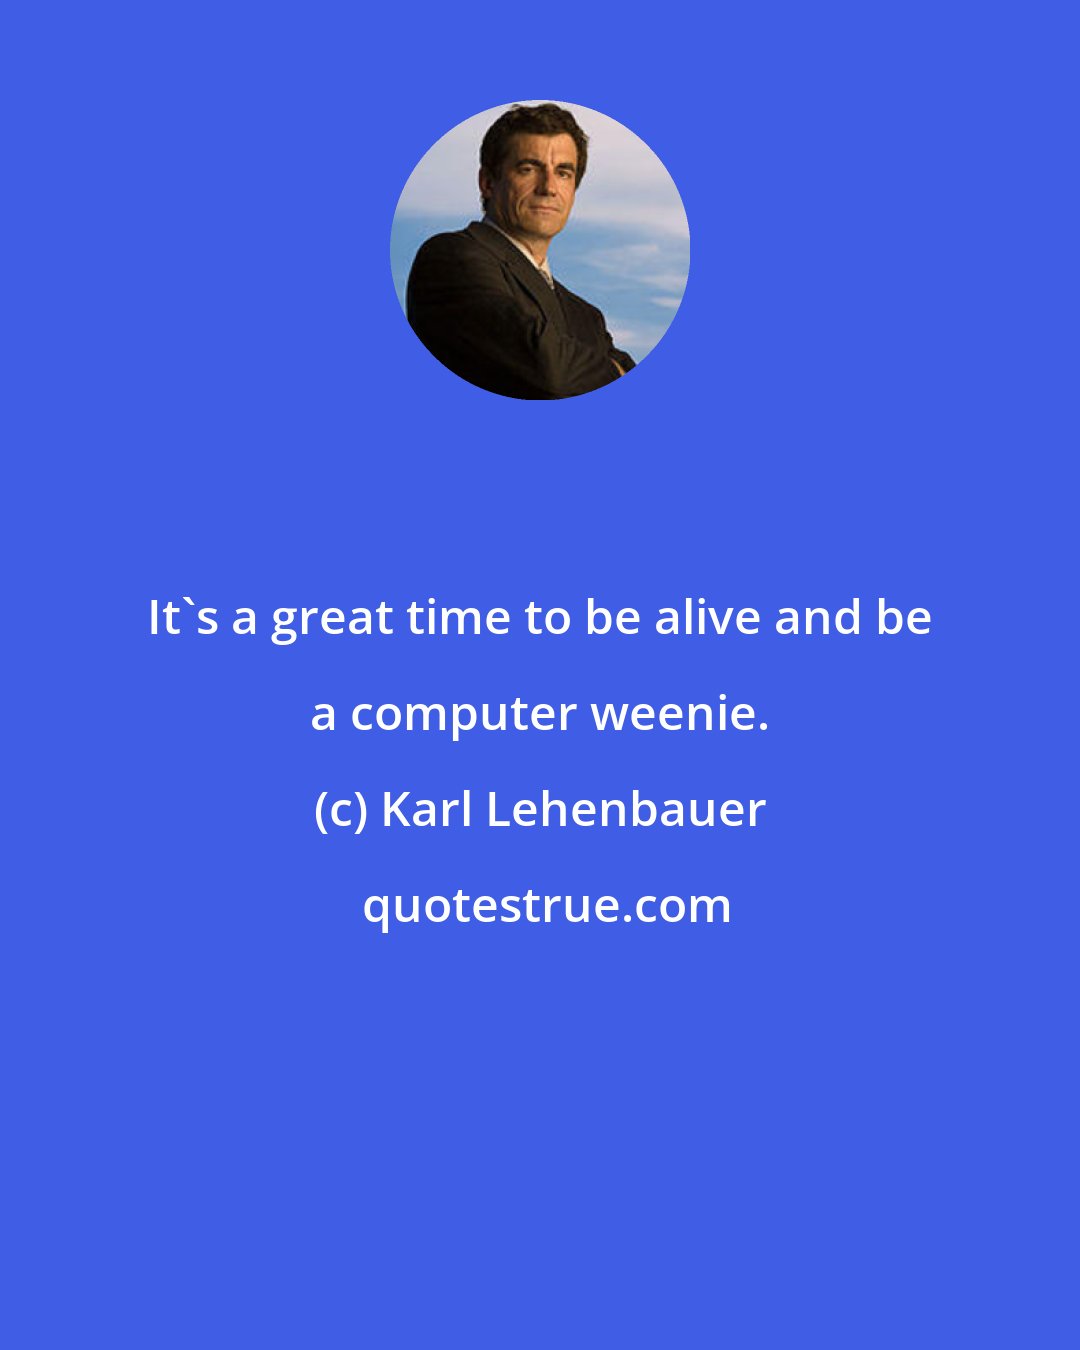 Karl Lehenbauer: It's a great time to be alive and be a computer weenie.